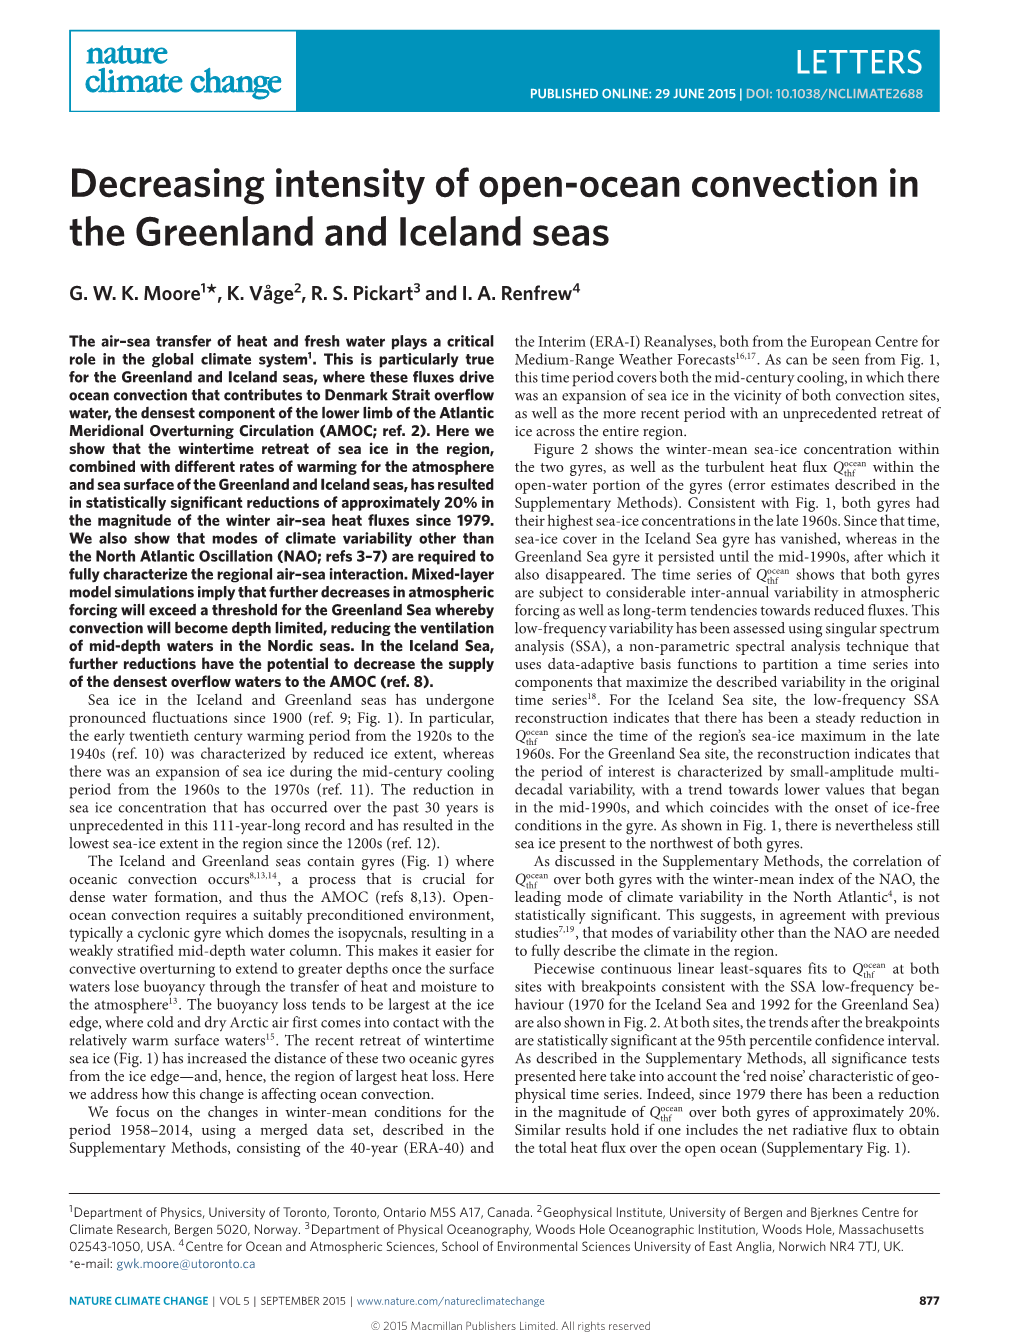 Decreasing Intensity of Open-Ocean Convection in the Greenland and Iceland Seas